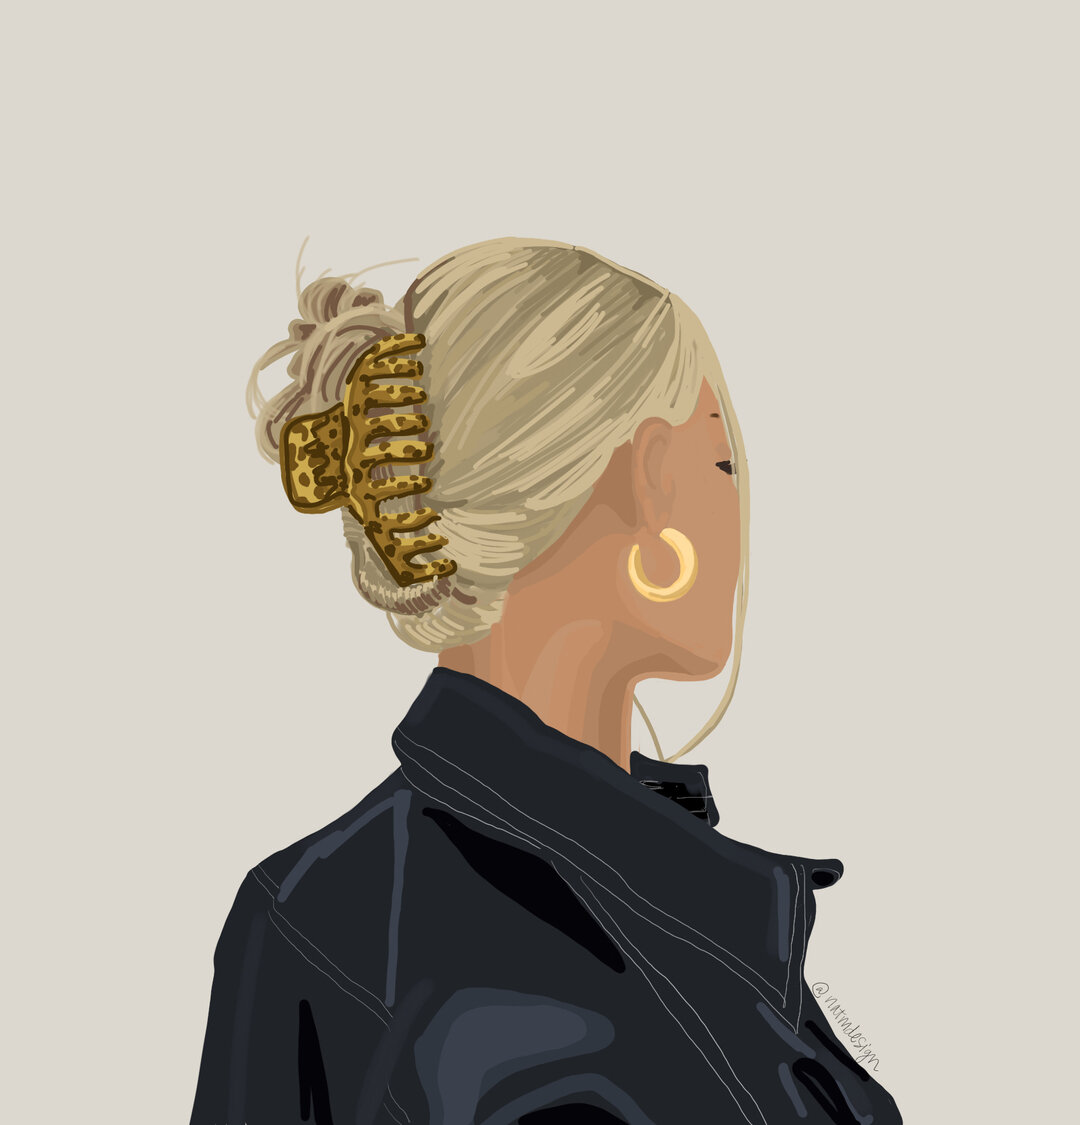 All about those details ✌🏼⠀⠀⠀⠀⠀⠀⠀⠀⠀
&bull;⠀⠀⠀⠀⠀⠀⠀⠀⠀
&bull;⠀⠀⠀⠀⠀⠀⠀⠀⠀
&bull;⠀⠀⠀⠀⠀⠀⠀⠀⠀
&bull;⠀⠀⠀⠀⠀⠀⠀⠀⠀
 #fashion #beauty #lifestyle #pinterest #behance #illustration #digitalillustration #lifestyle #digitaldrawing #portrait #fashionModel #summerstyle #